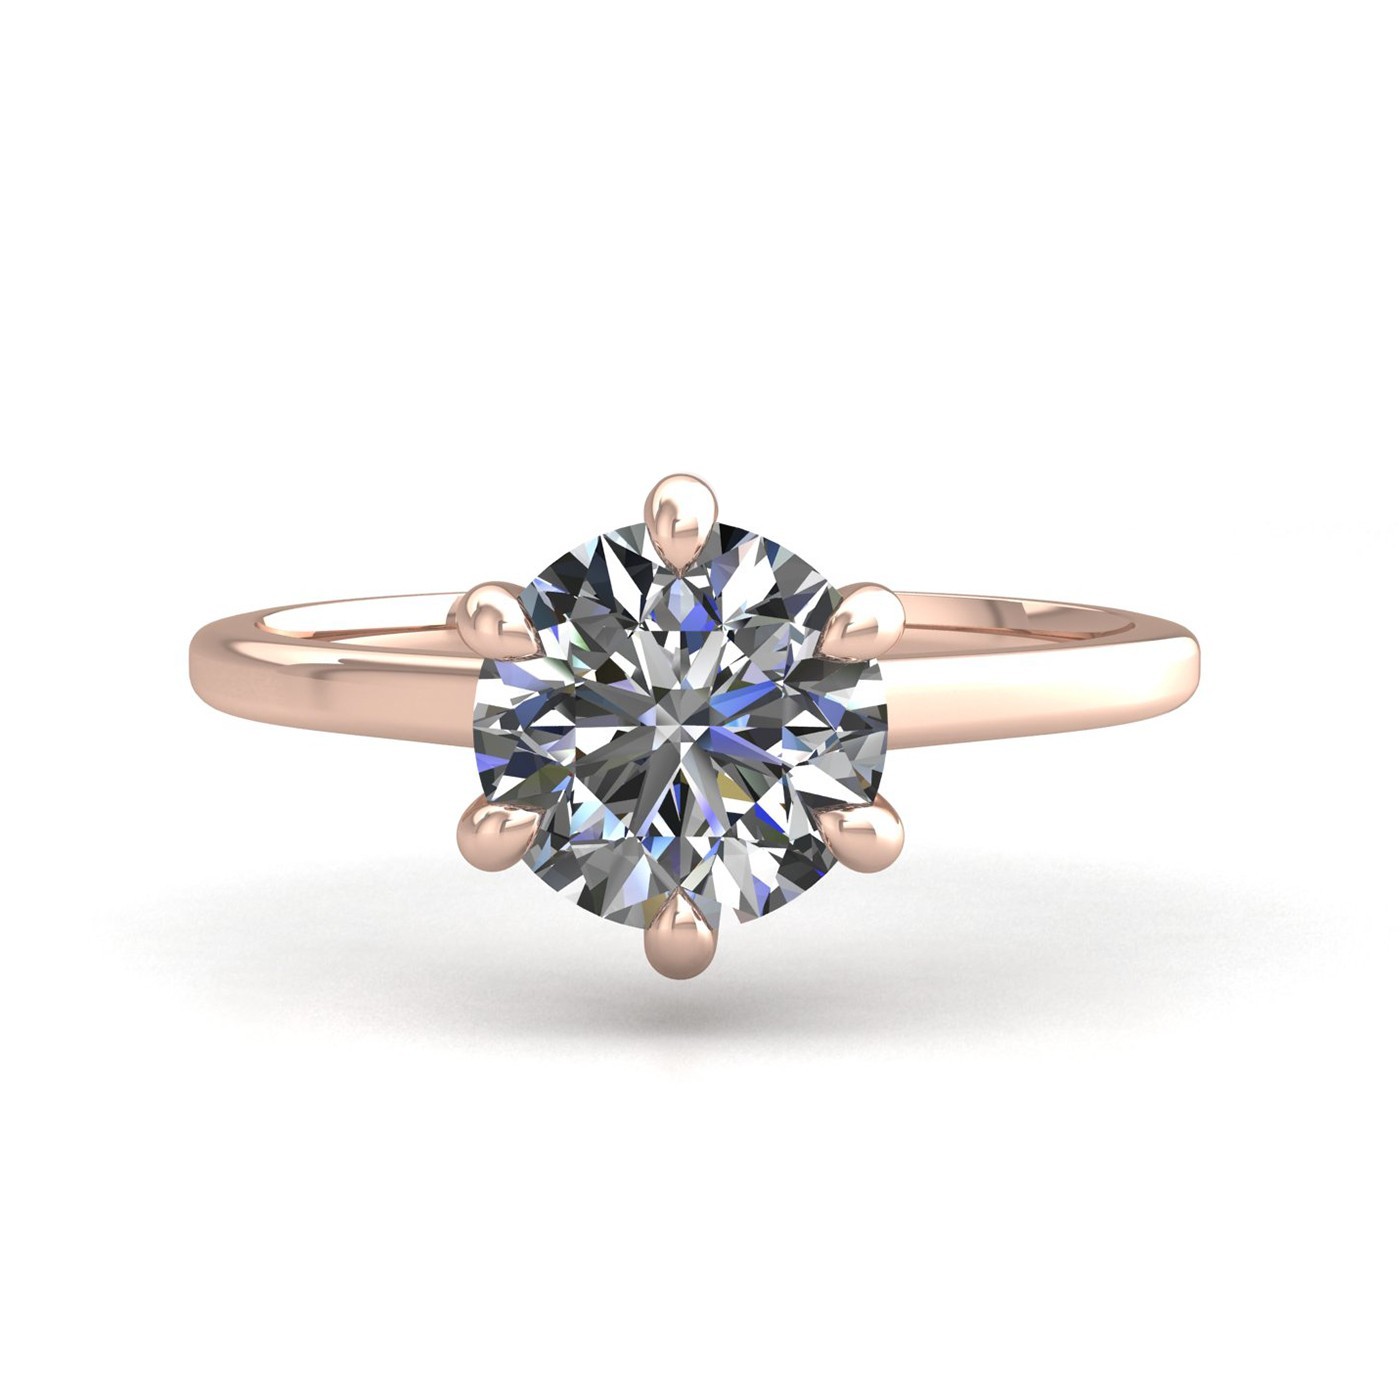 18k rose gold 1,20 ct 6 prongs solitaire round cut diamond engagement ring with whisper thin band